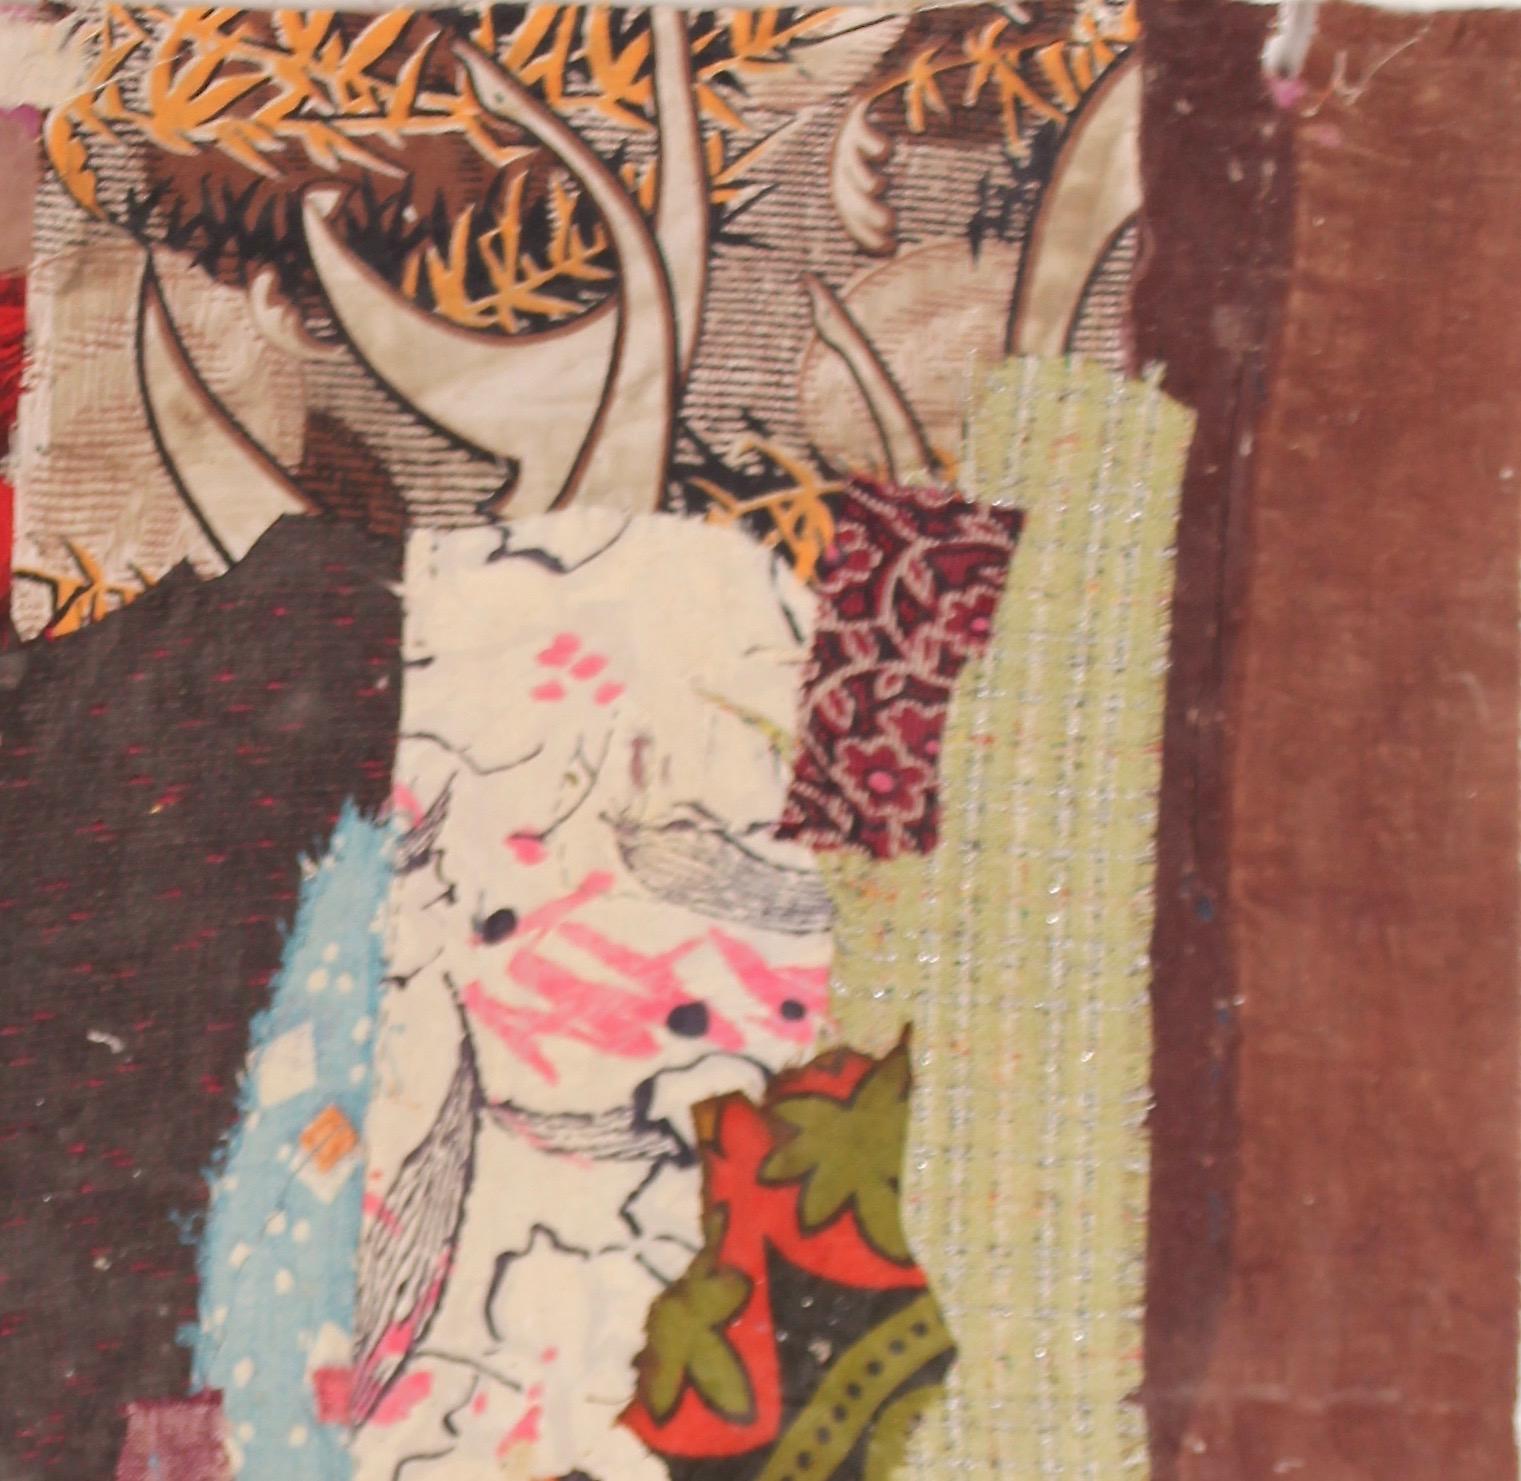 20th Century Chinese Collaged, Ge Ba Textile “Paintings” Made by Anonymous Women, 1950s